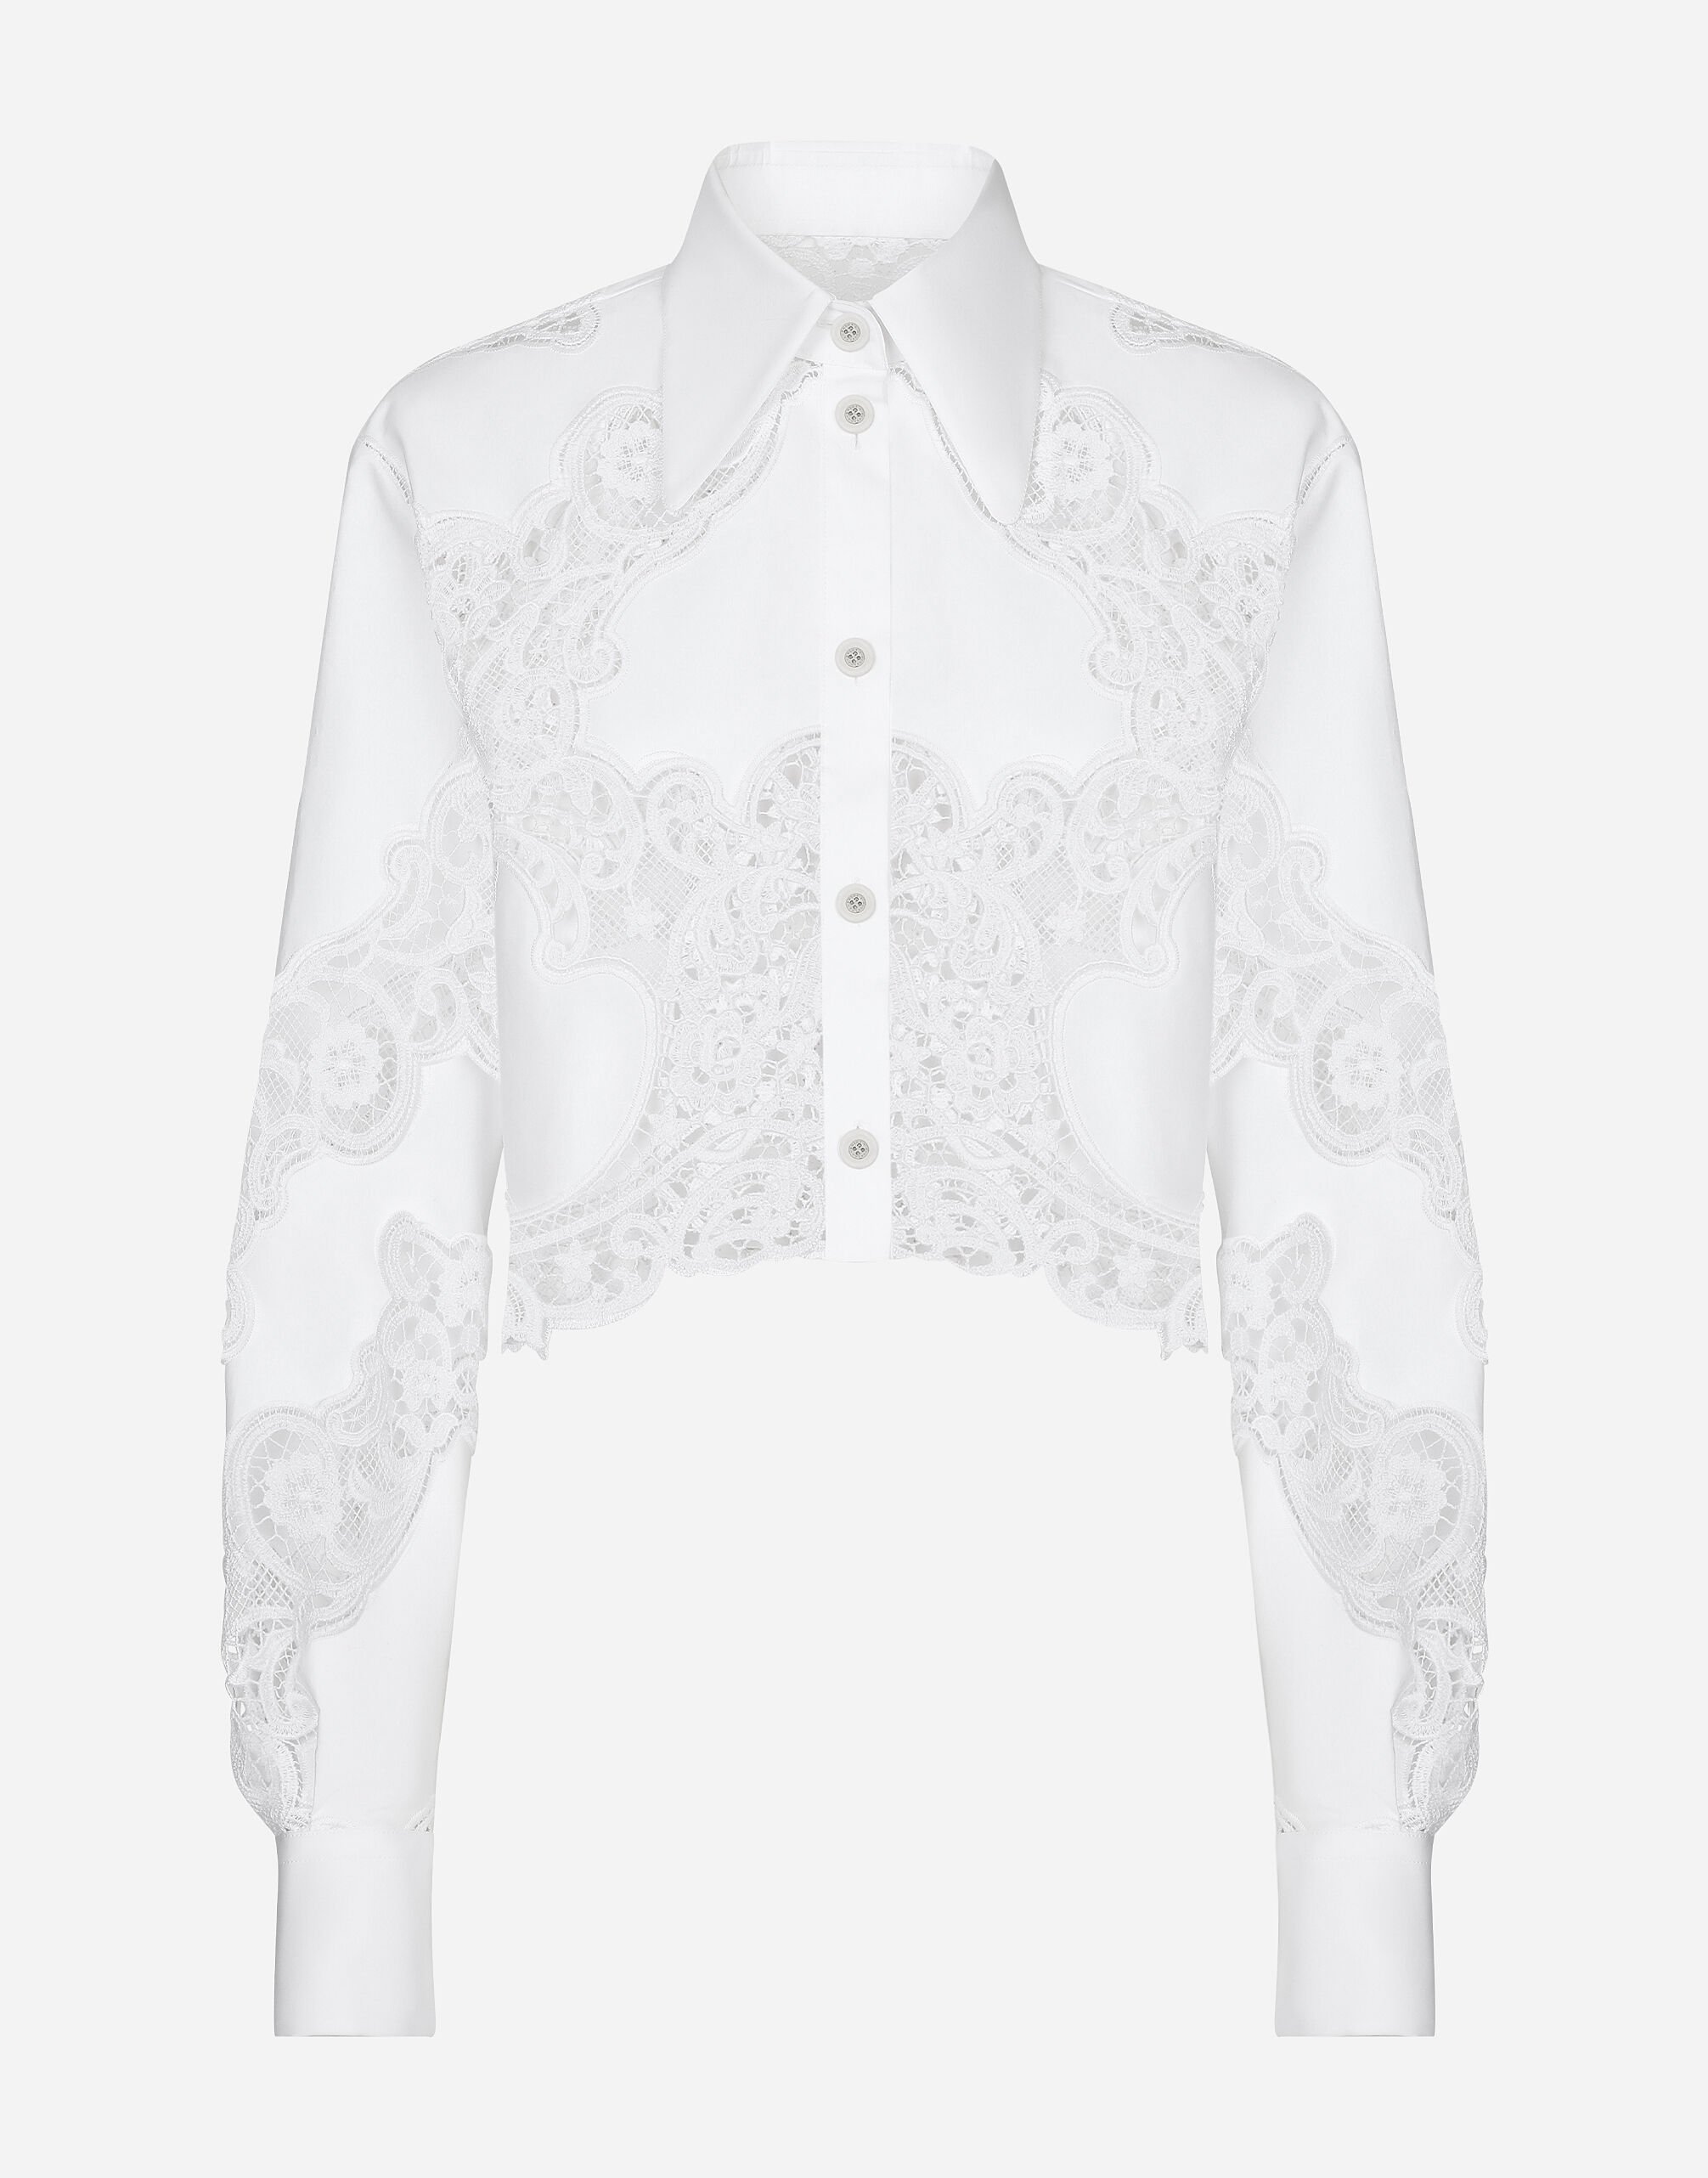 Dolce & Gabbana Cotton shirt with floral openwork embroidery White F7AB4ZGDCKB